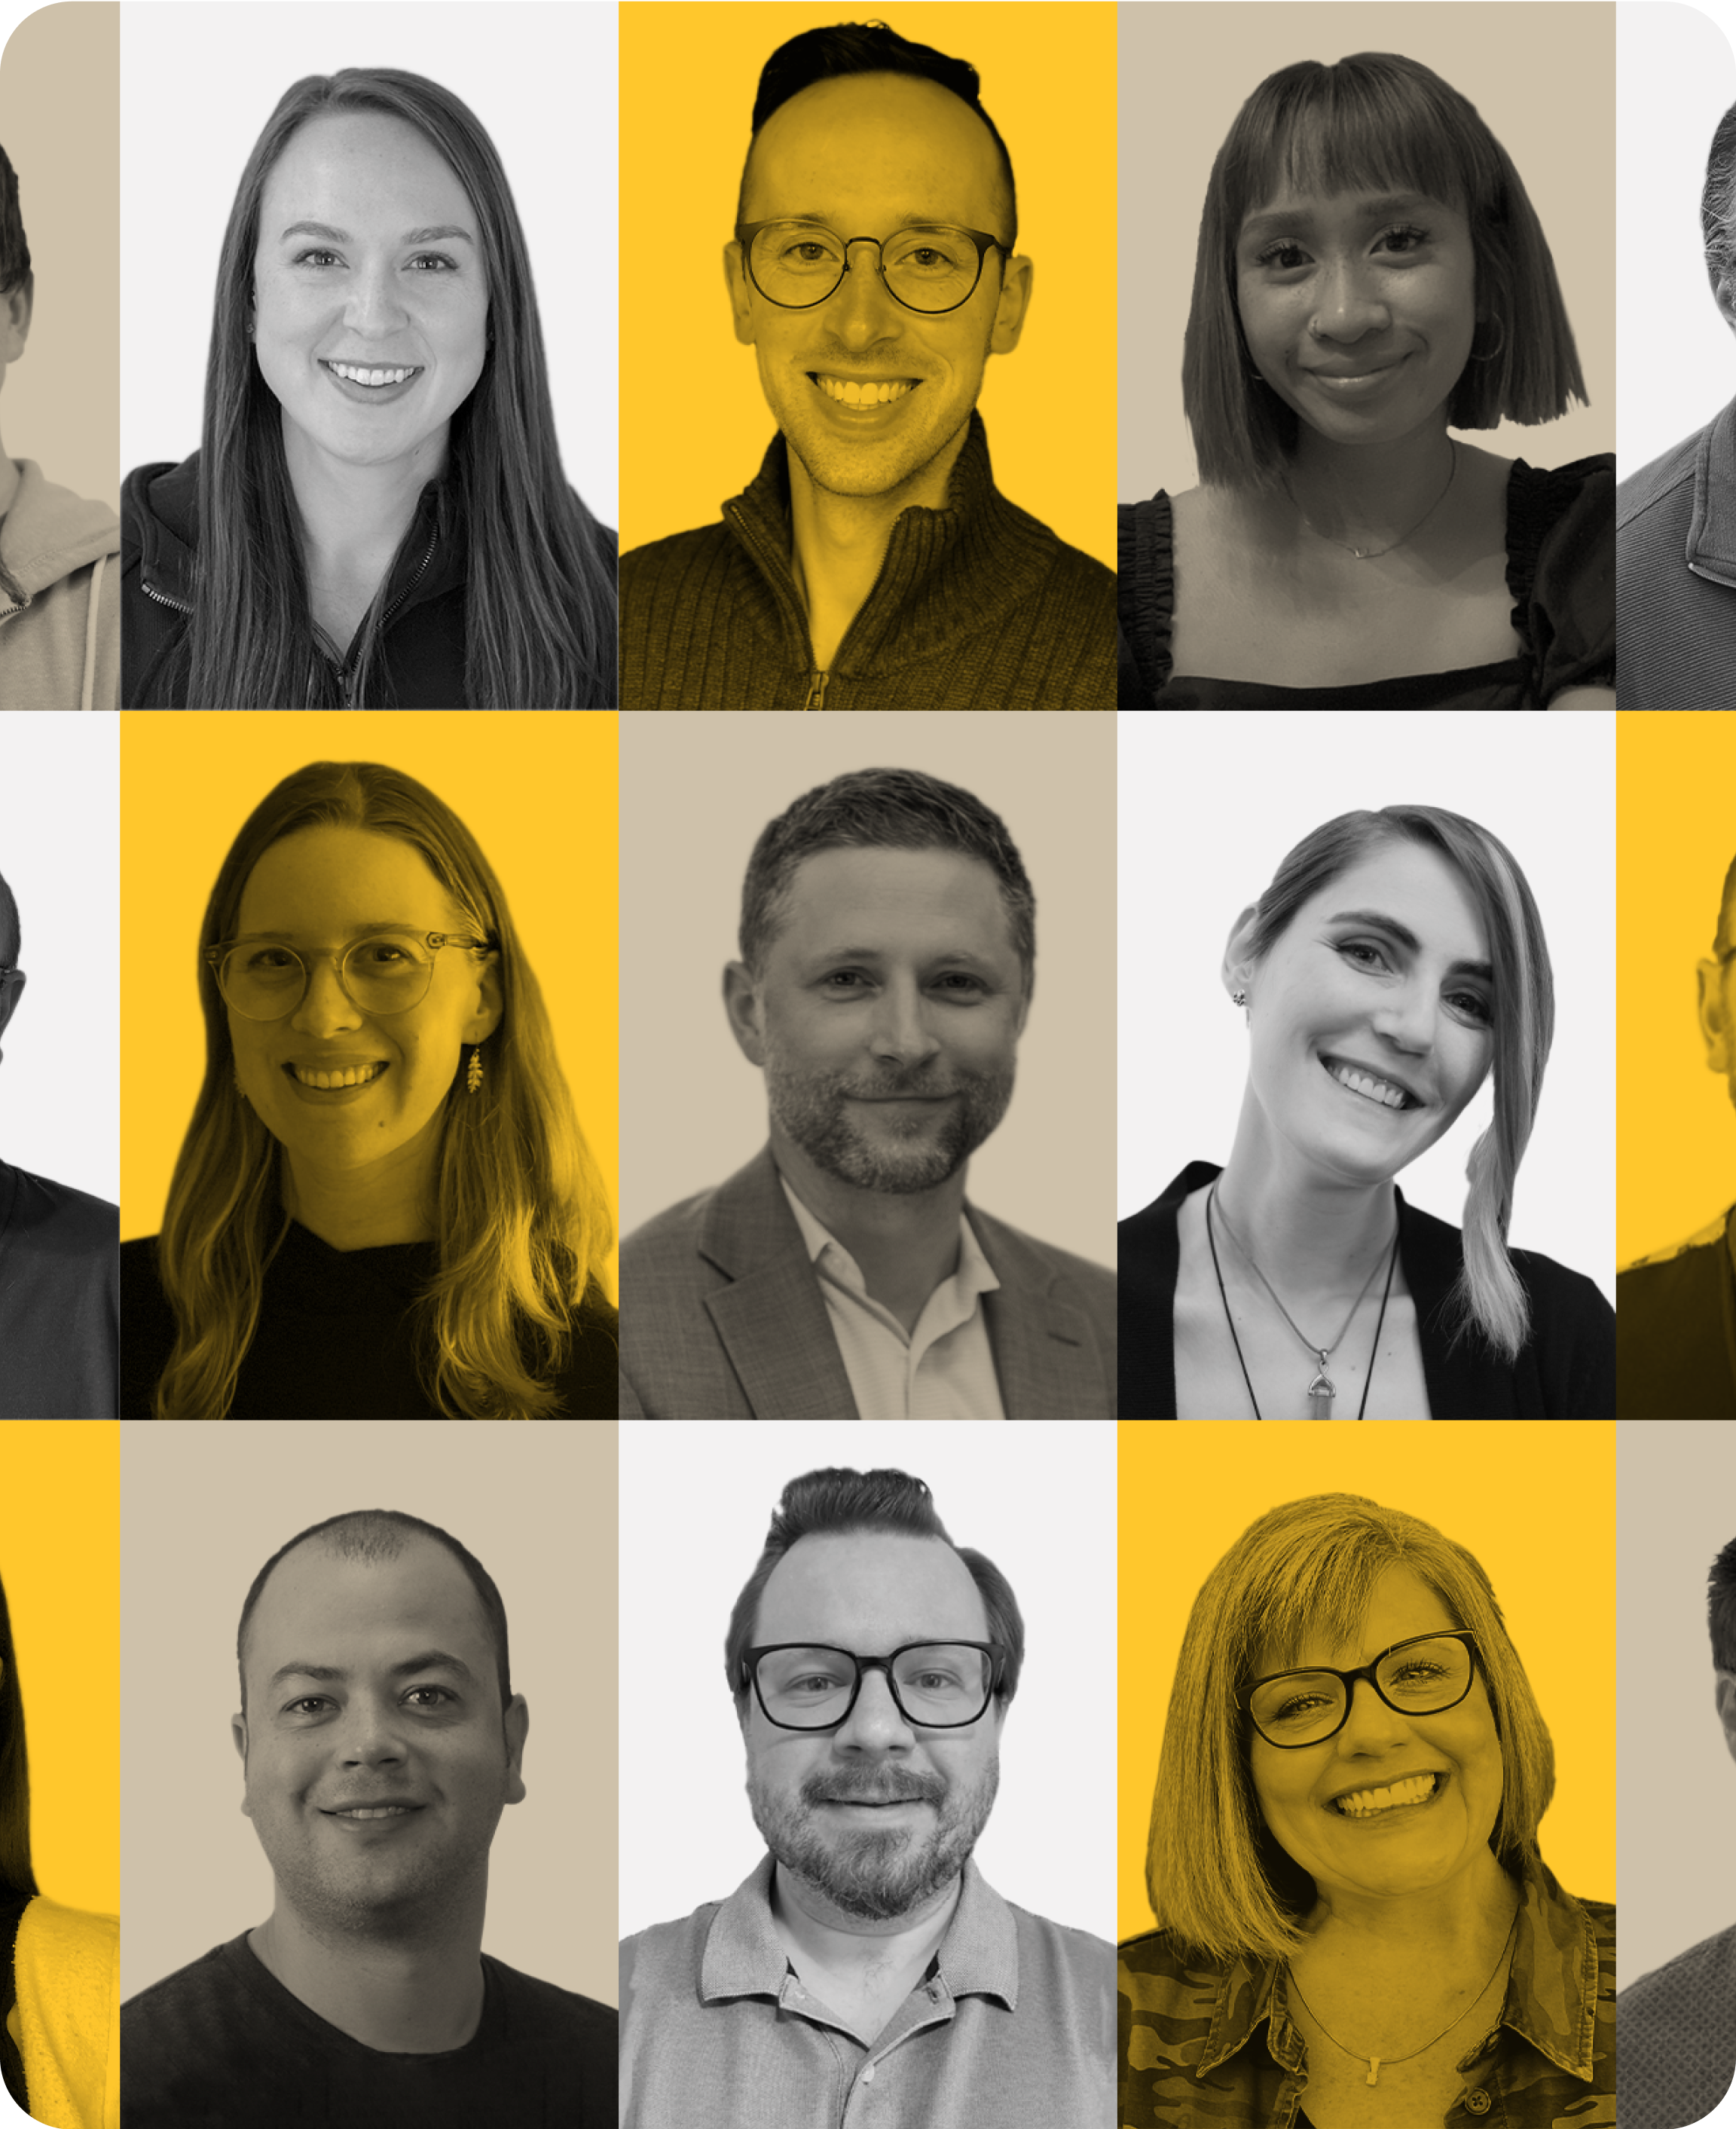 Photo collage of Twenty Ideas employees with gray, tan, and yellow filters applied in patchwork design.